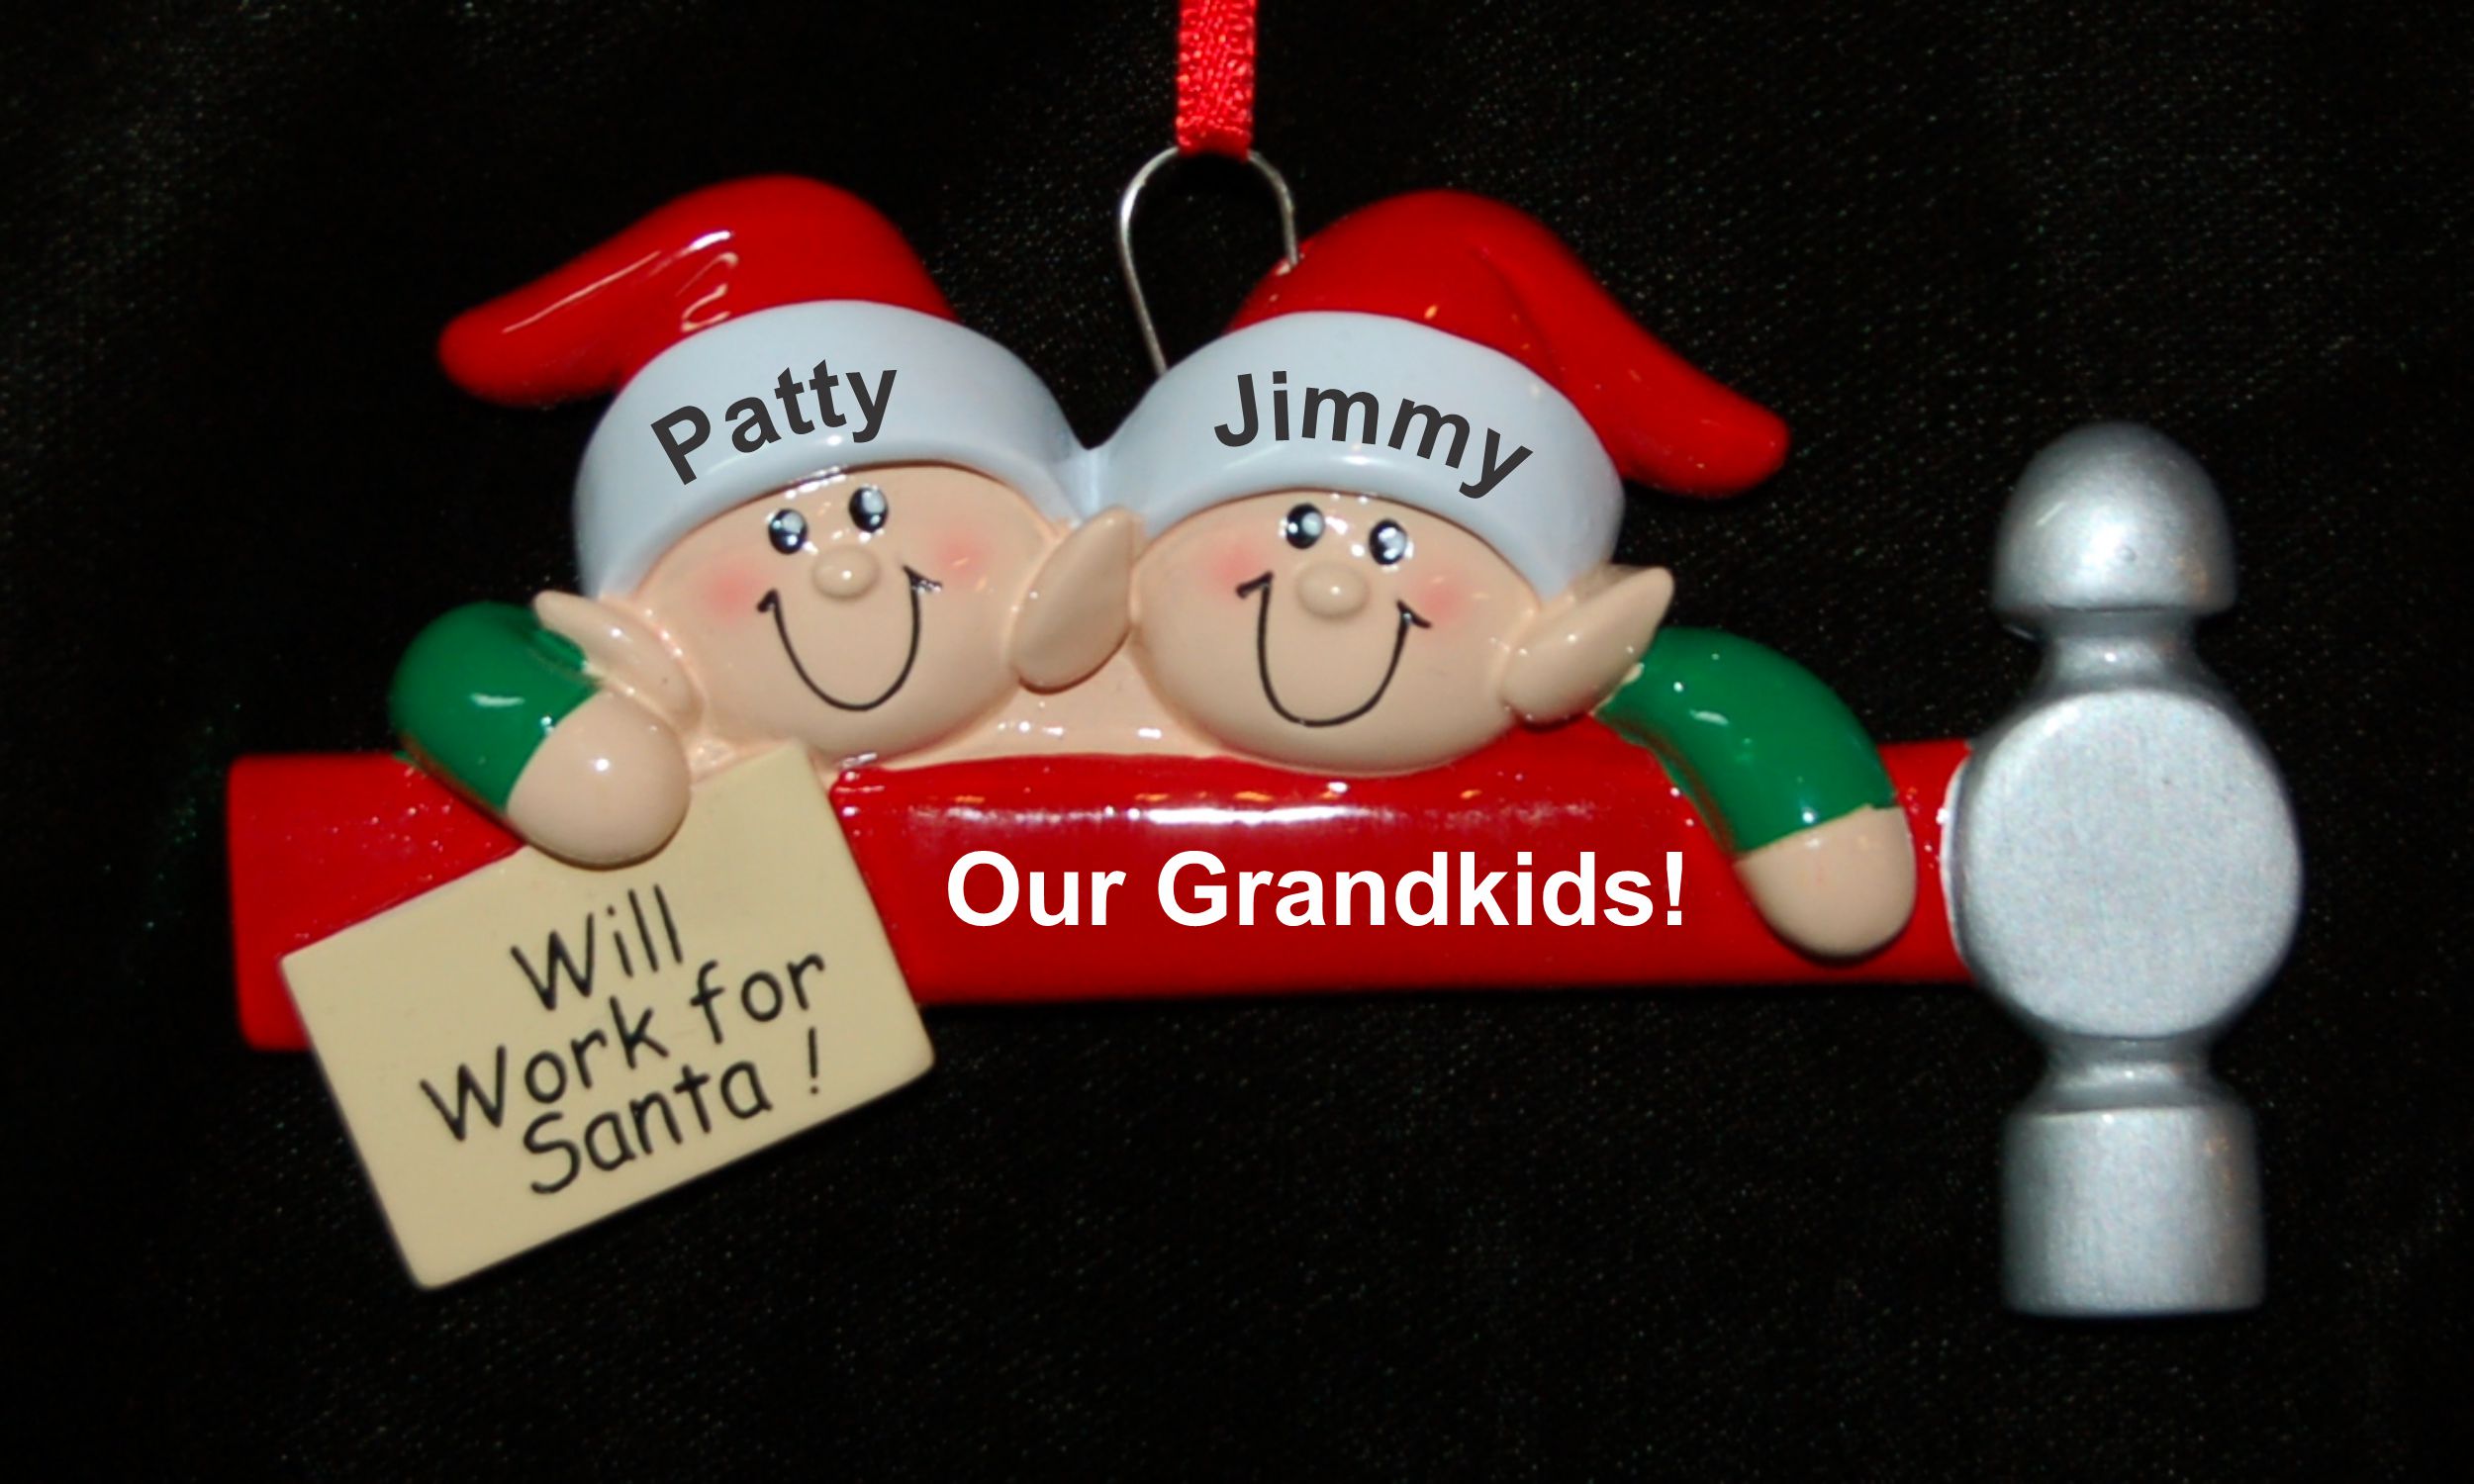 Personalized Grandparents Christmas Ornament Will Work for Santa 2 Grandkids Personalized by Russell Rhodes